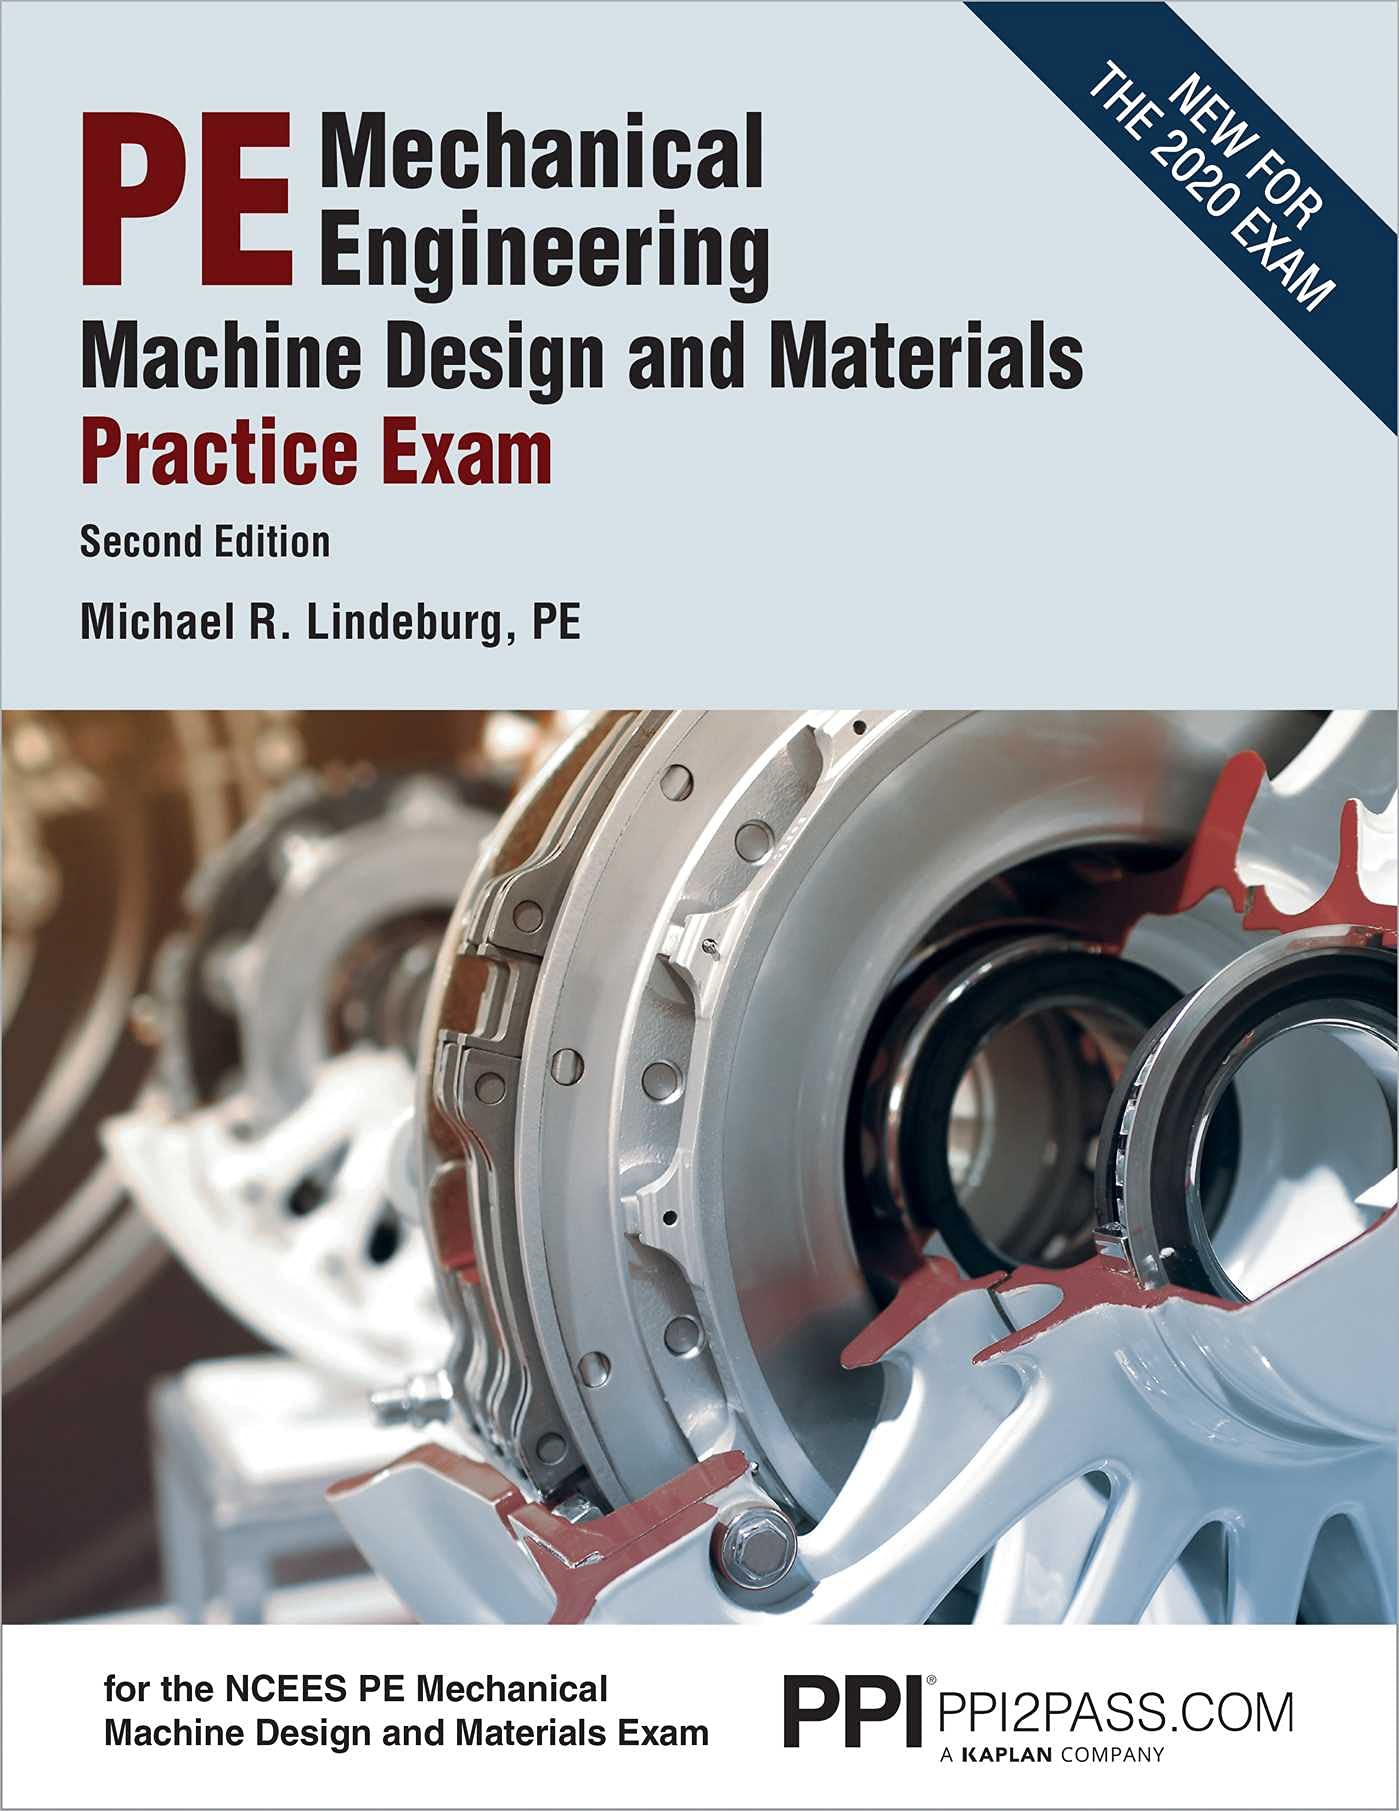 PPI PE Mechanical Engineering Machine Design and Materials Practice Exam, 2nd Edition – A Comprehensive Practice Exam for the NCEES PE Mechanical M...